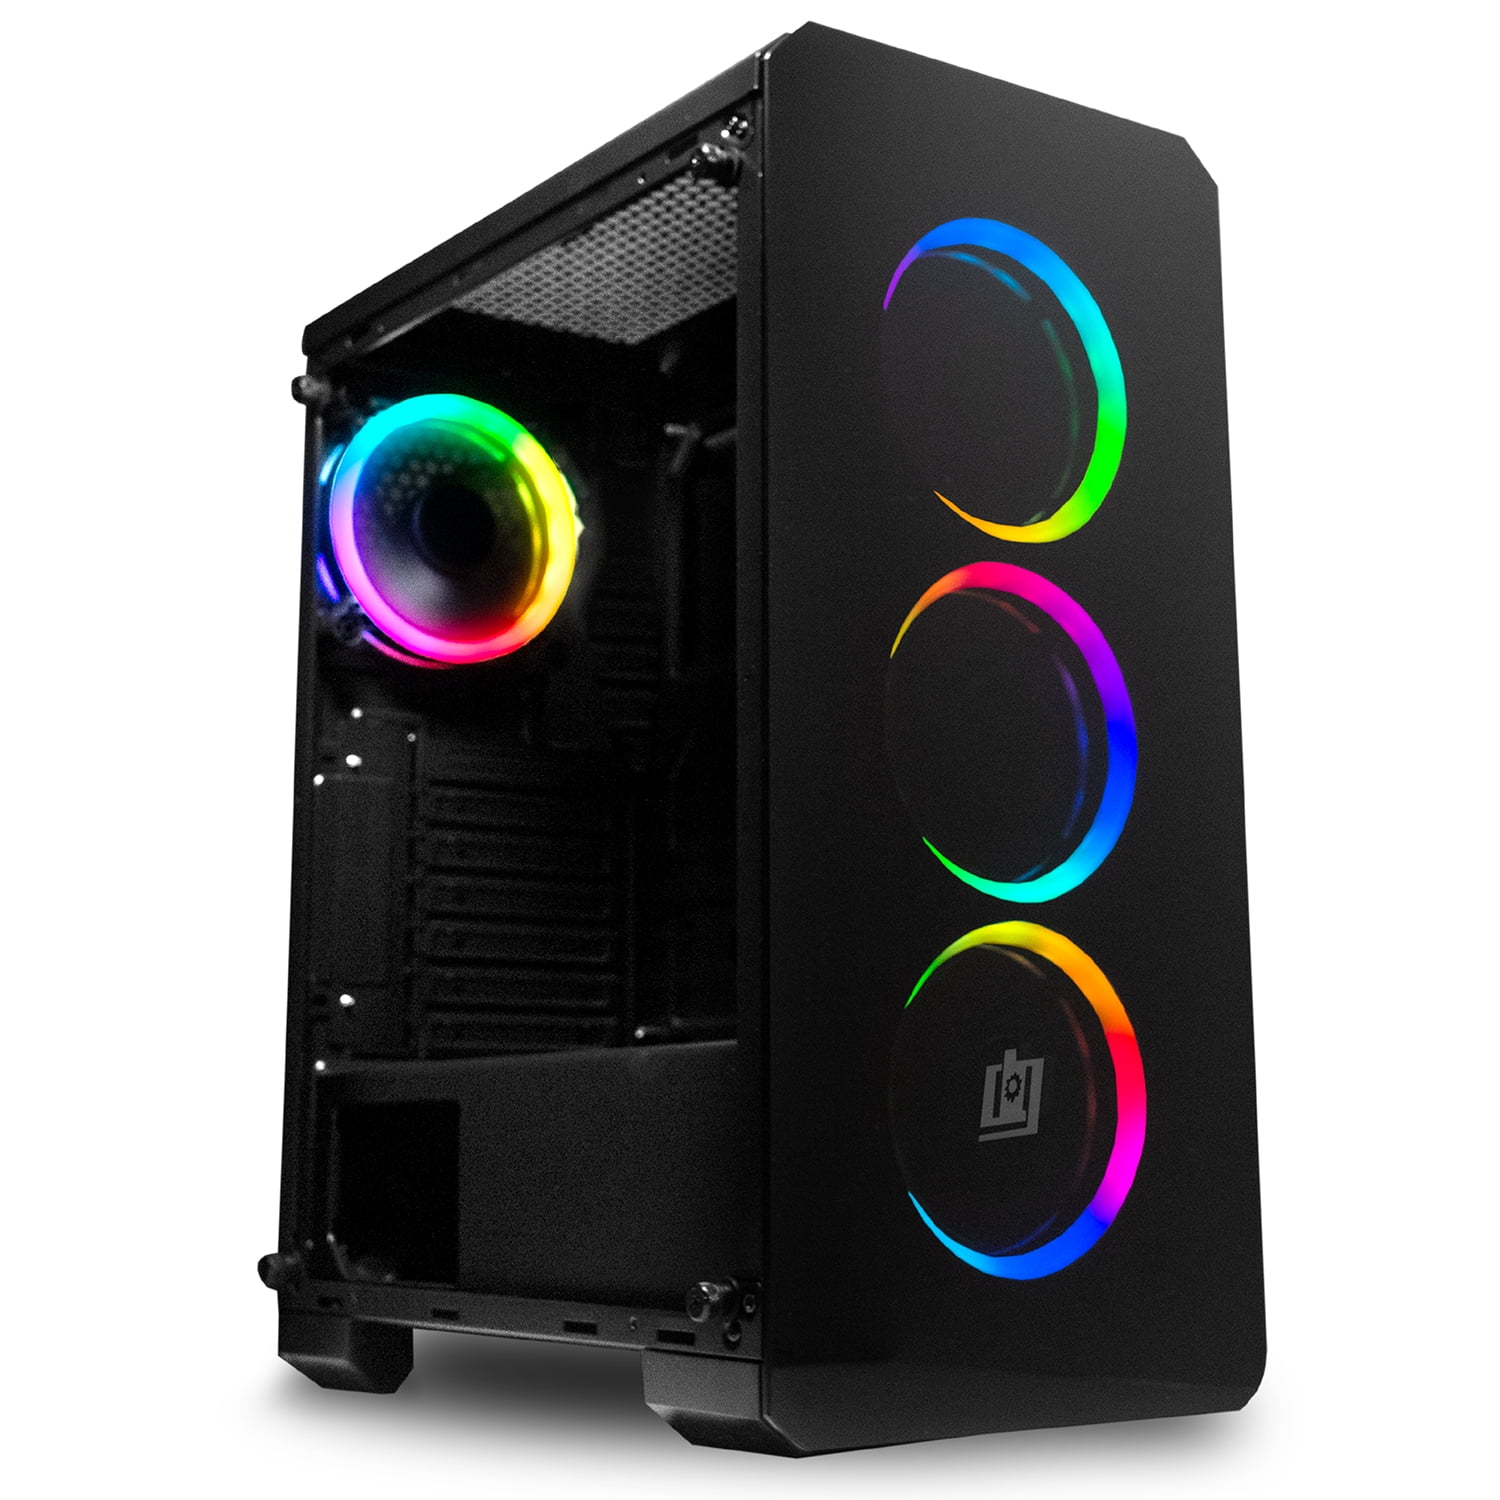 Rige hugge evaluerbare Deco Gear Mid-Tower PC Gaming Computer Case 3-Sided Tempered Glass and LED  Lighting - Mini-ITX, Micro-ATX, ATX - Includes 4 120mm Double Ring Fans w/  Expansion for More, 7 Expansion Slots, 4